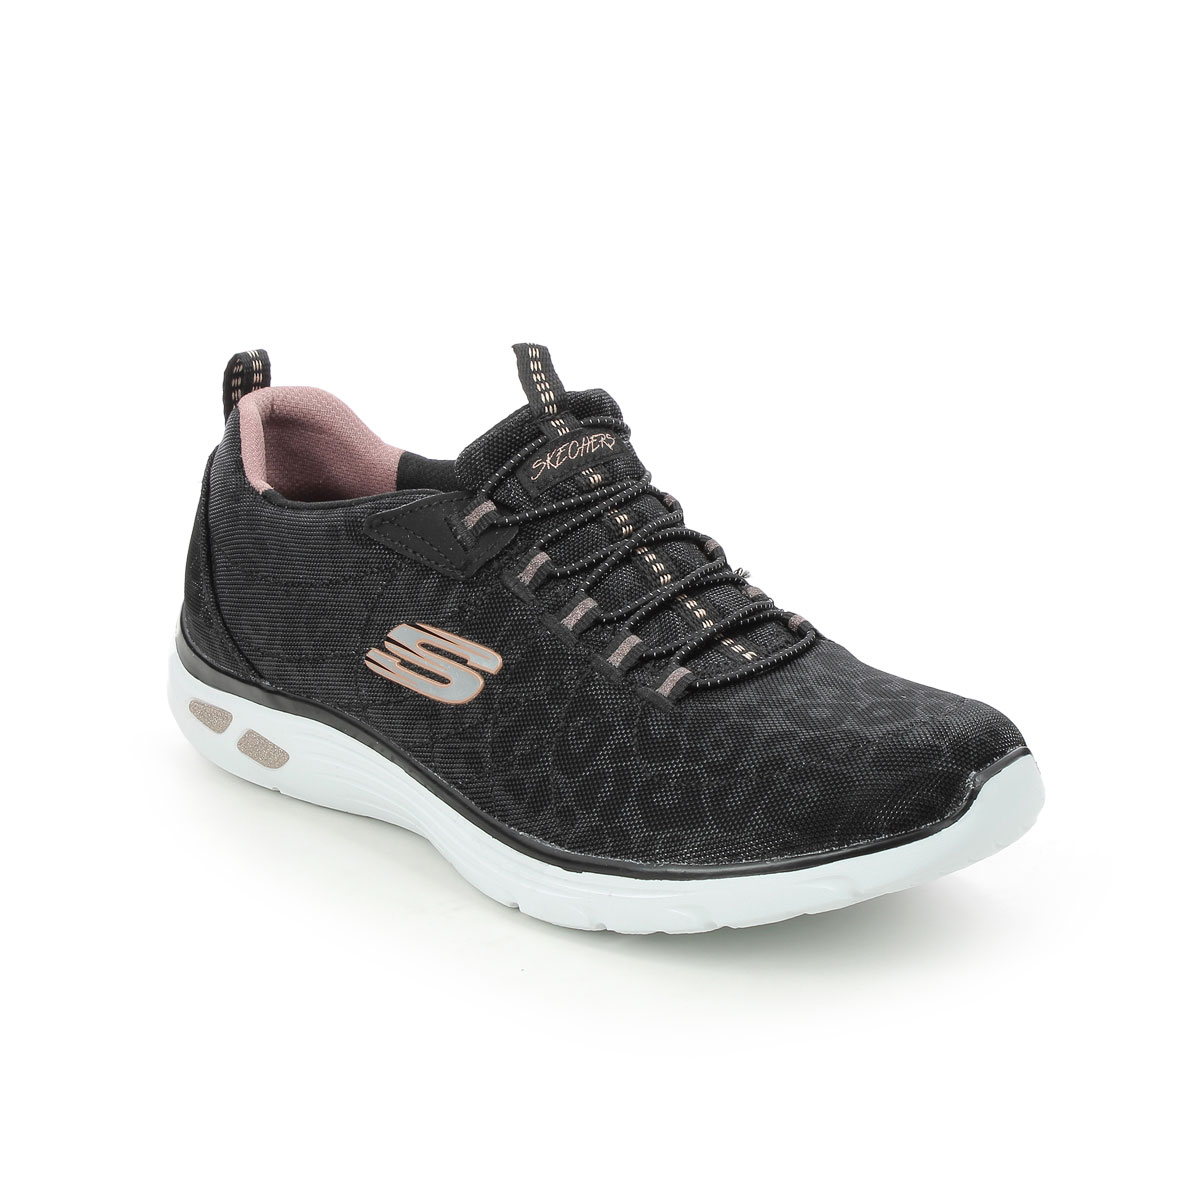 Skechers Empire Delux Spotted Relaxed Black Rose Gold Womens Trainers 12825 In Size 5.5 In Plain Black Rose Gold